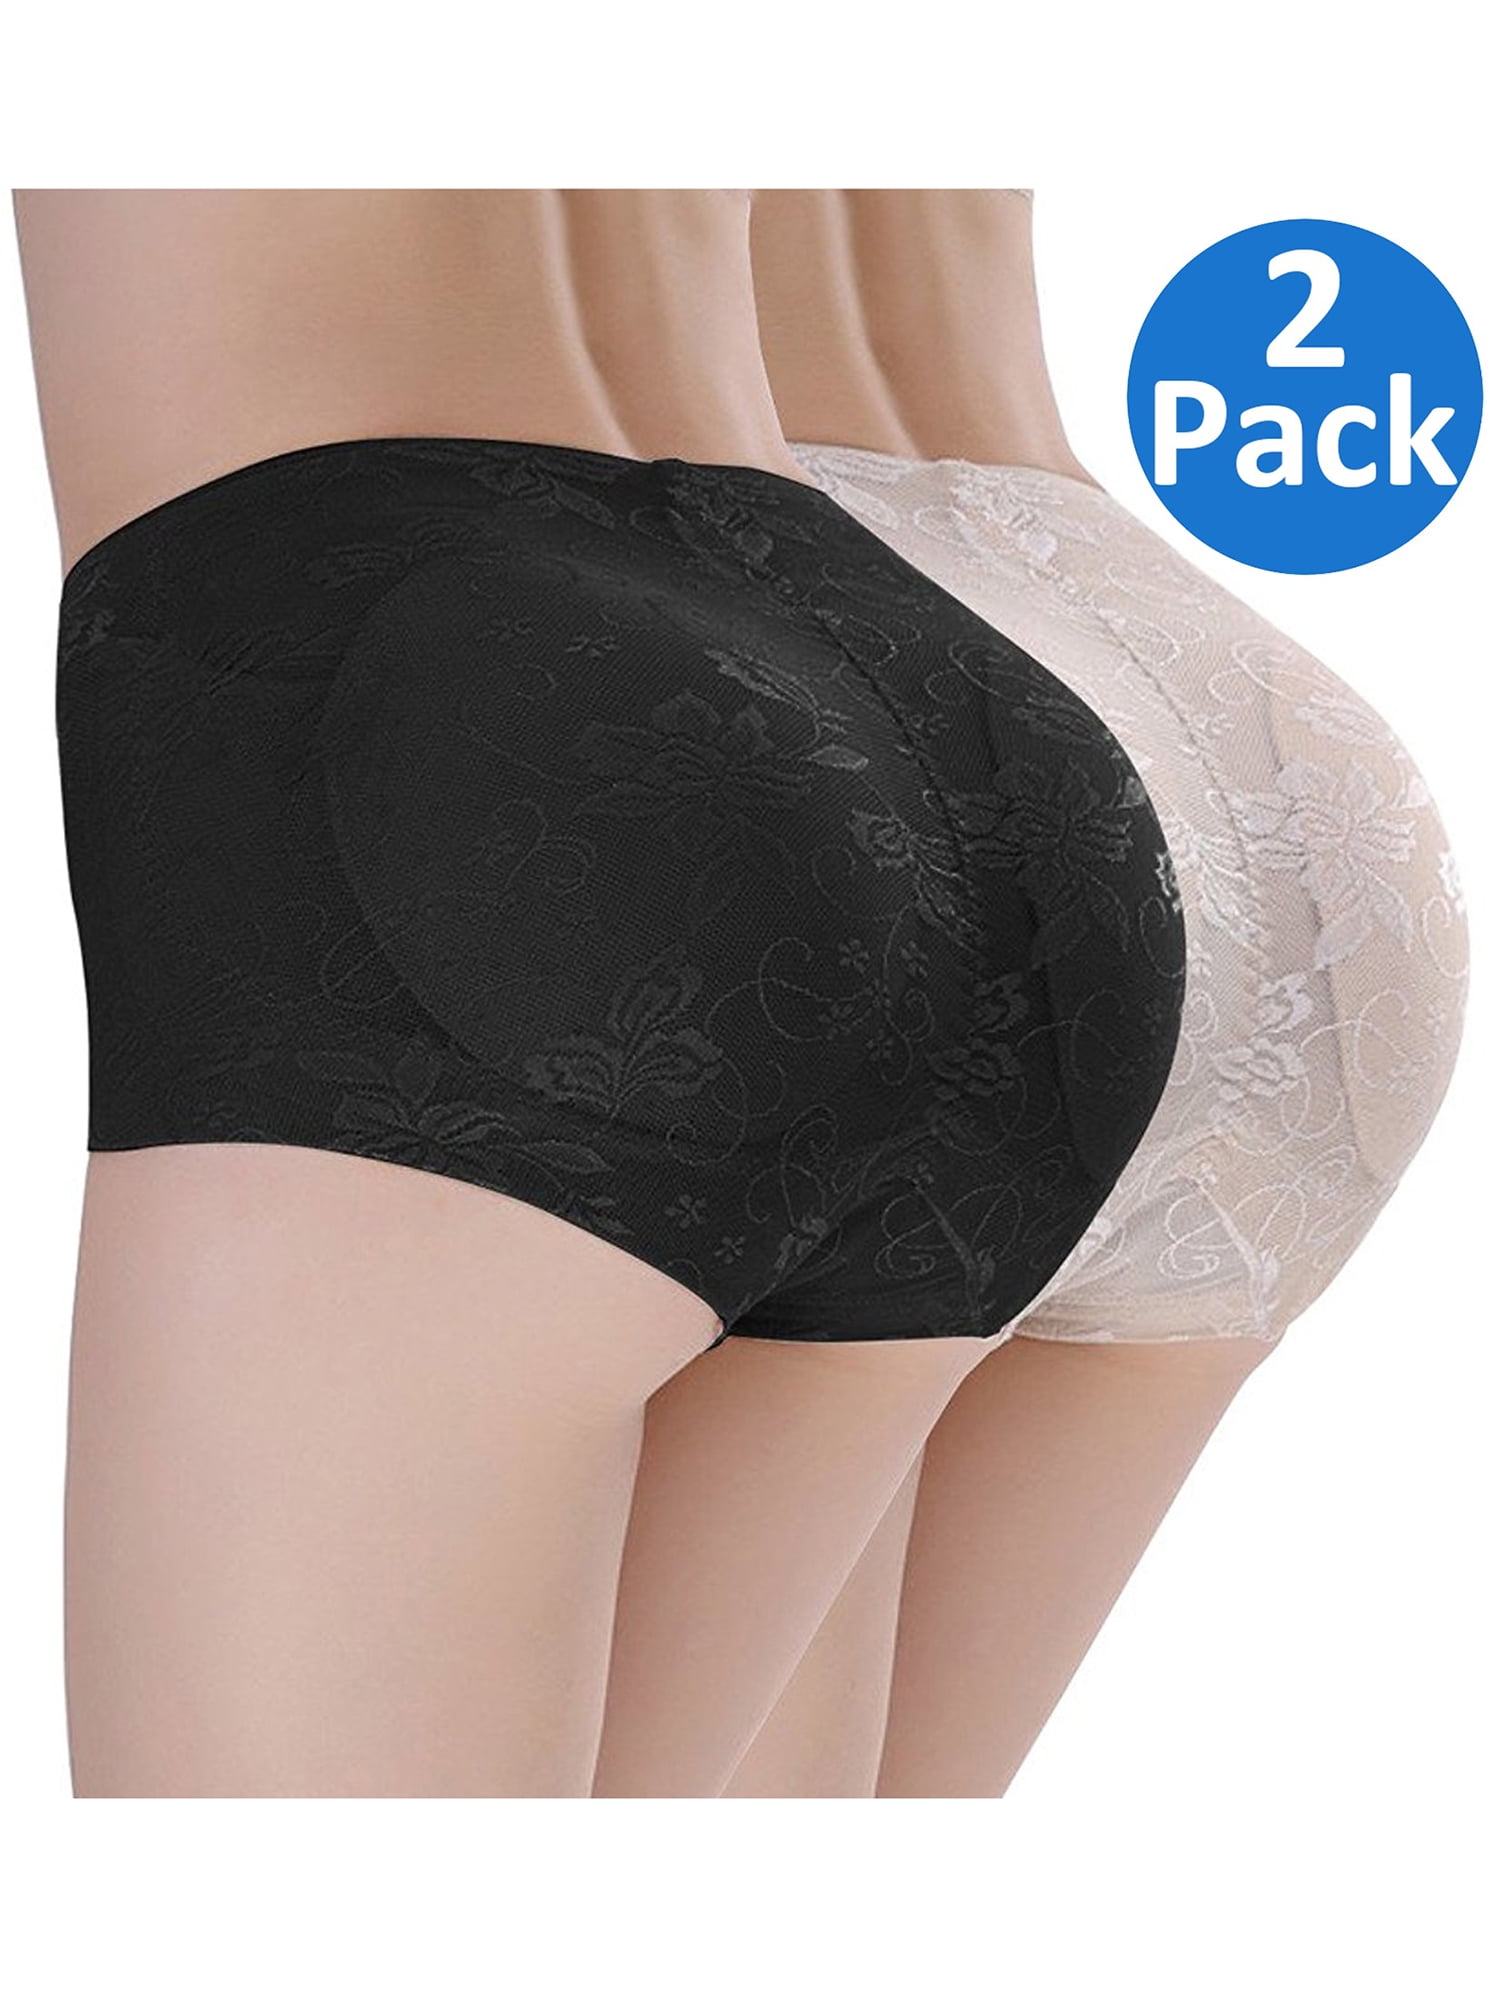 Evenriver Women Shapewear Shorts High Waist Tummy Control Panties with Butt Lifter Padded for Sport Party 